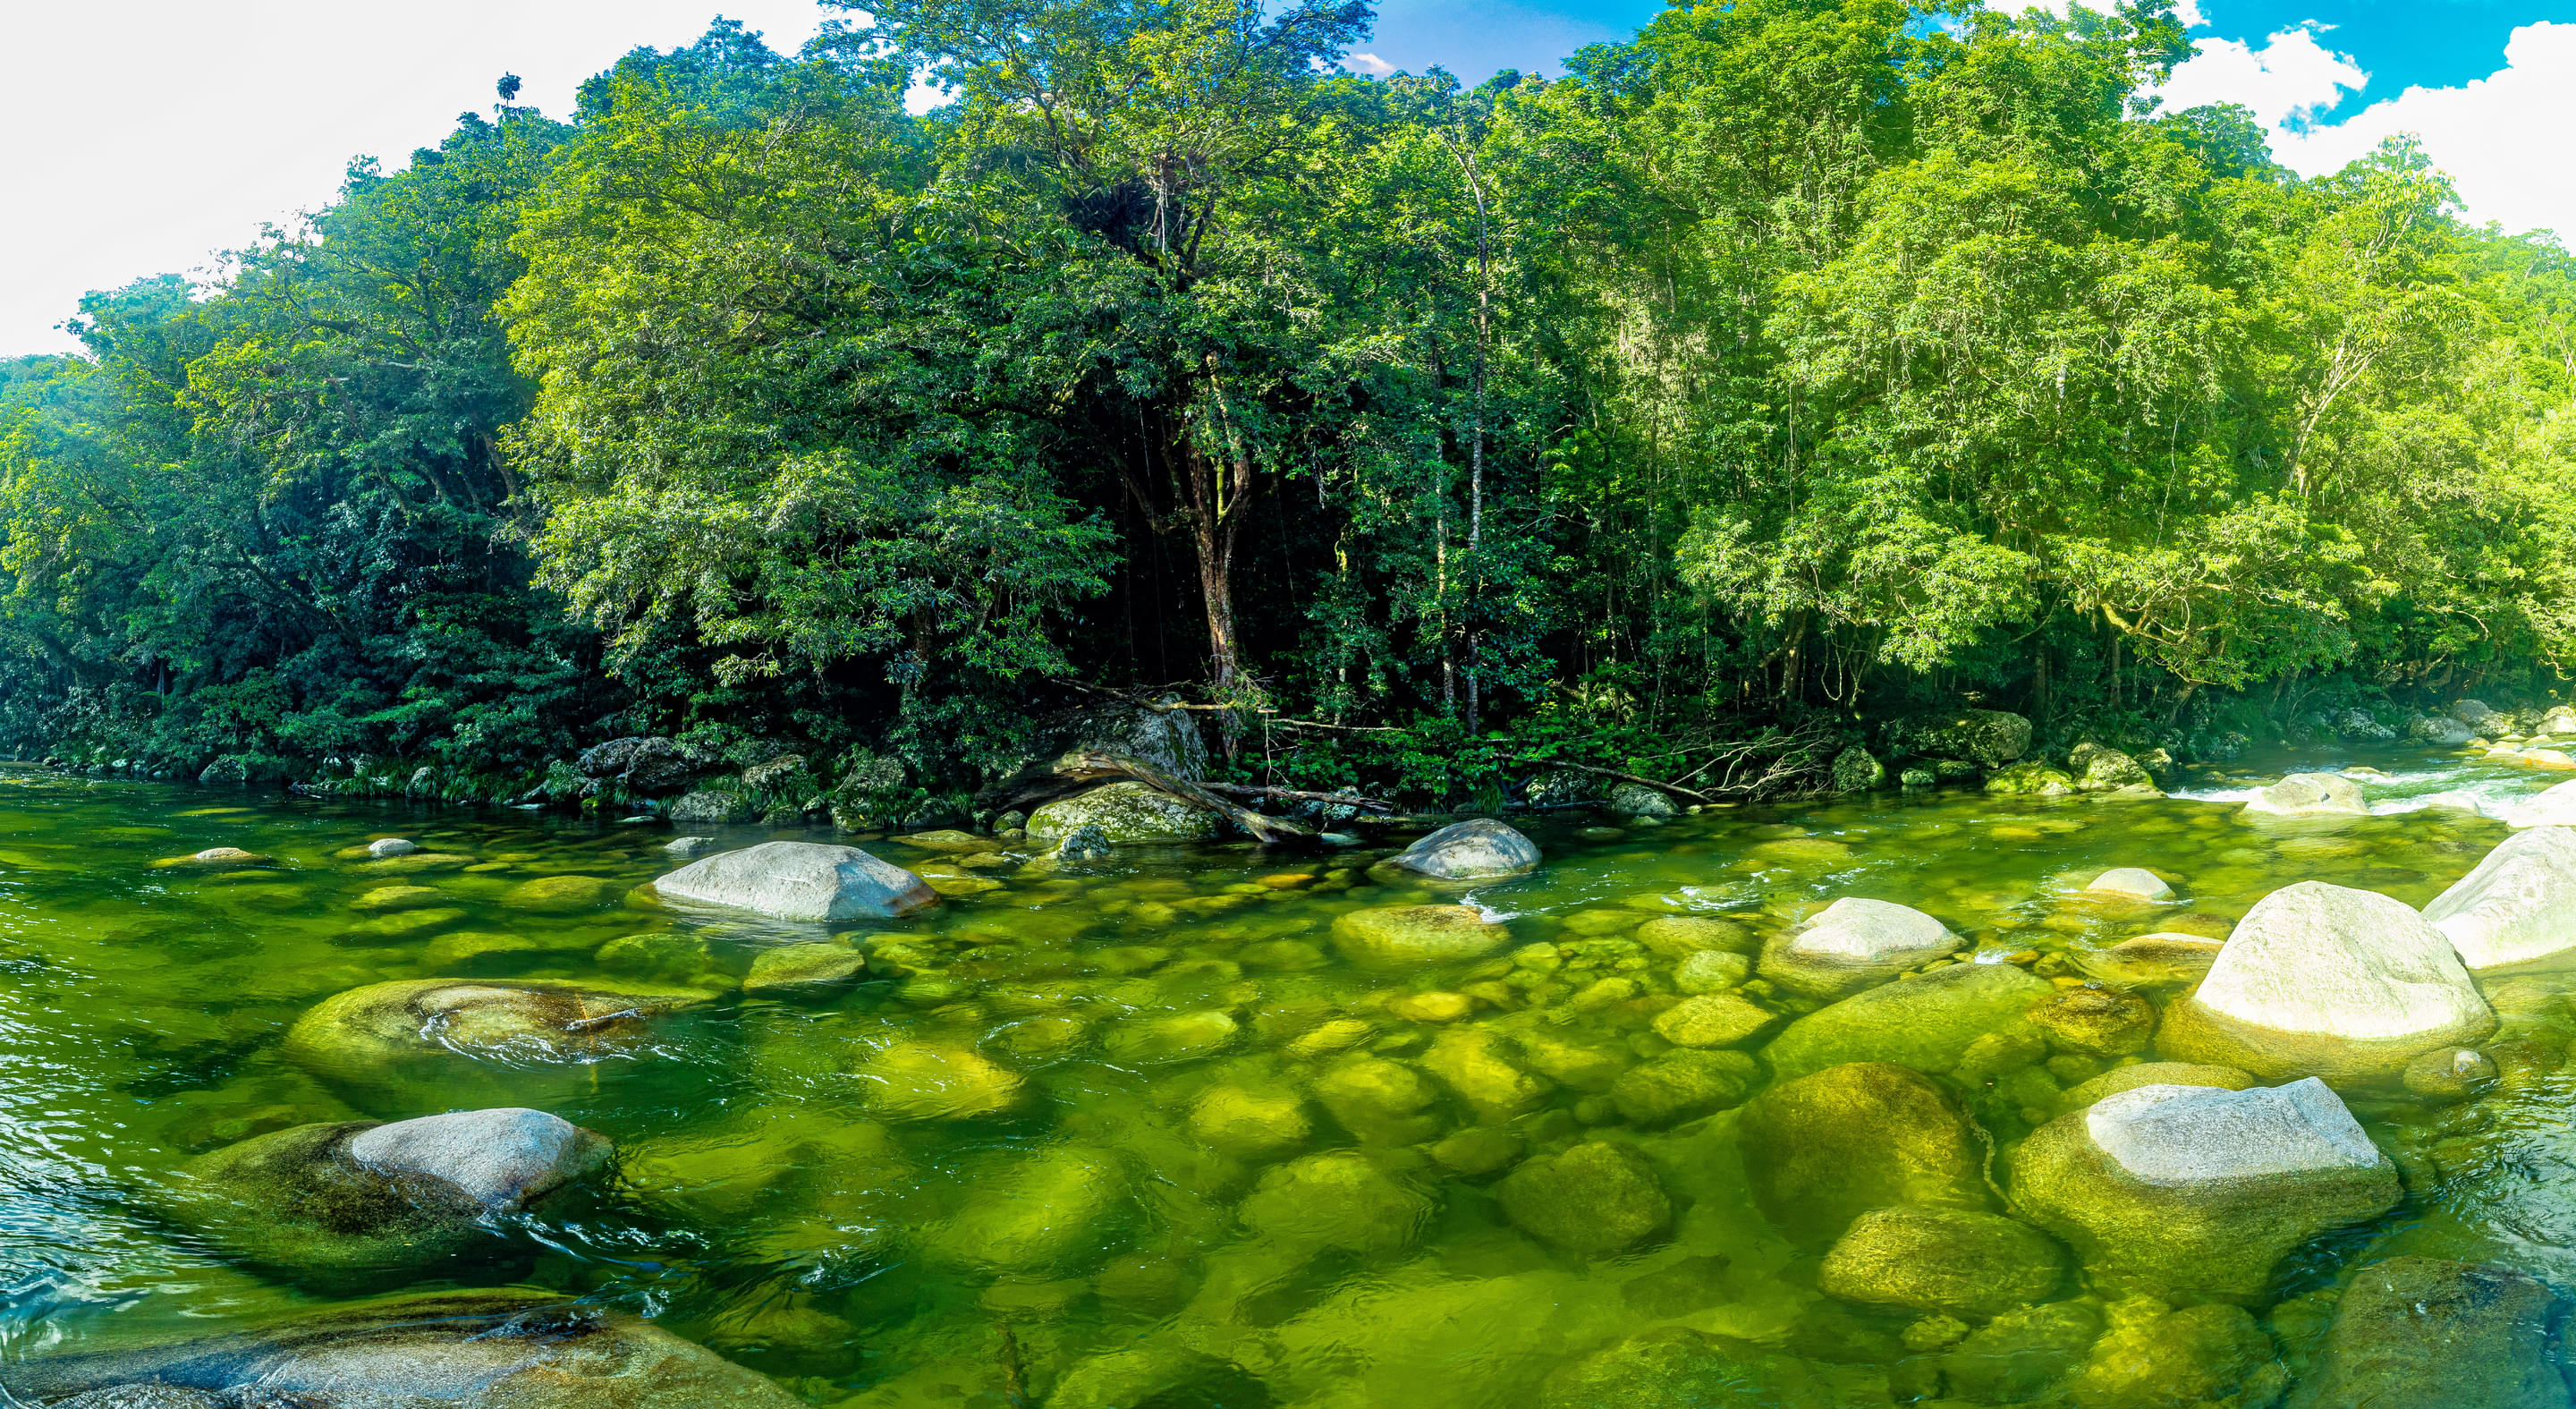 Daintree National Park Overview